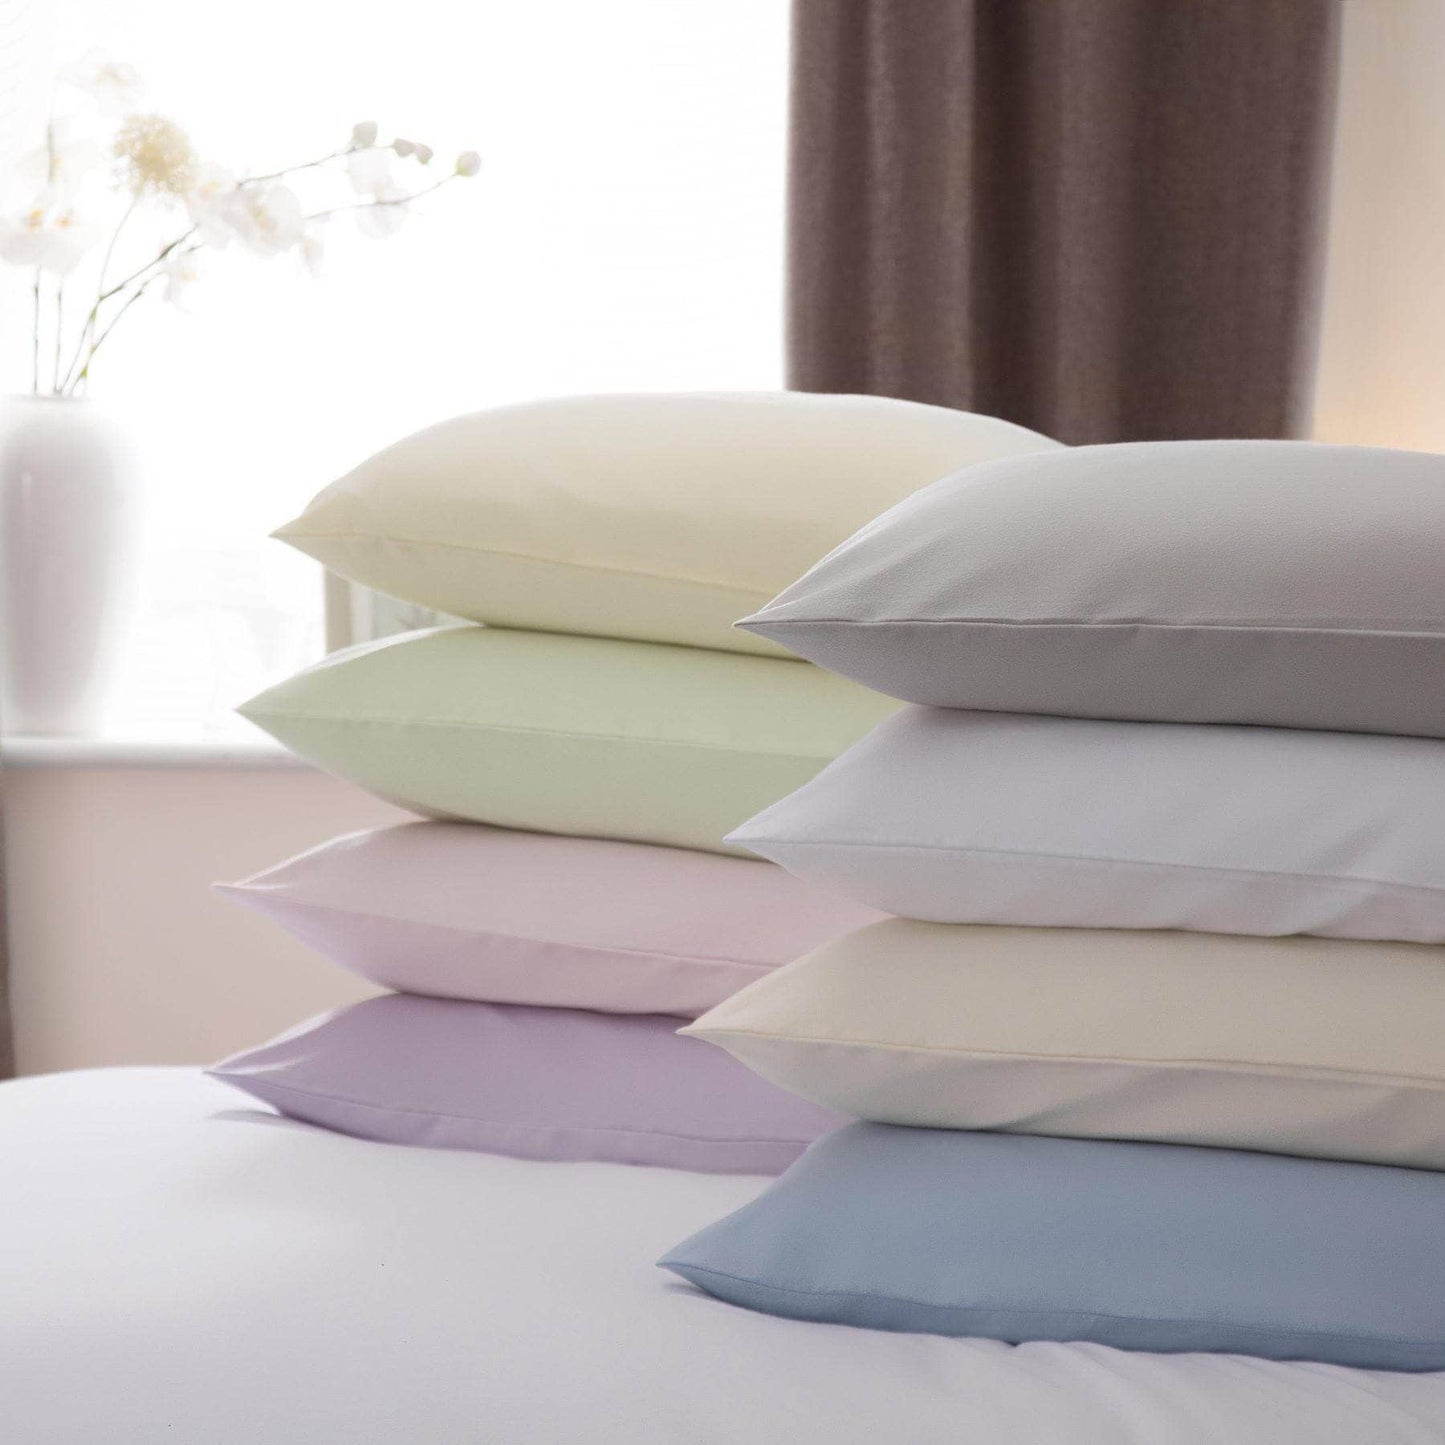 Homeware  -  Grey Brushed Cotton Pillowcases  -  60009878